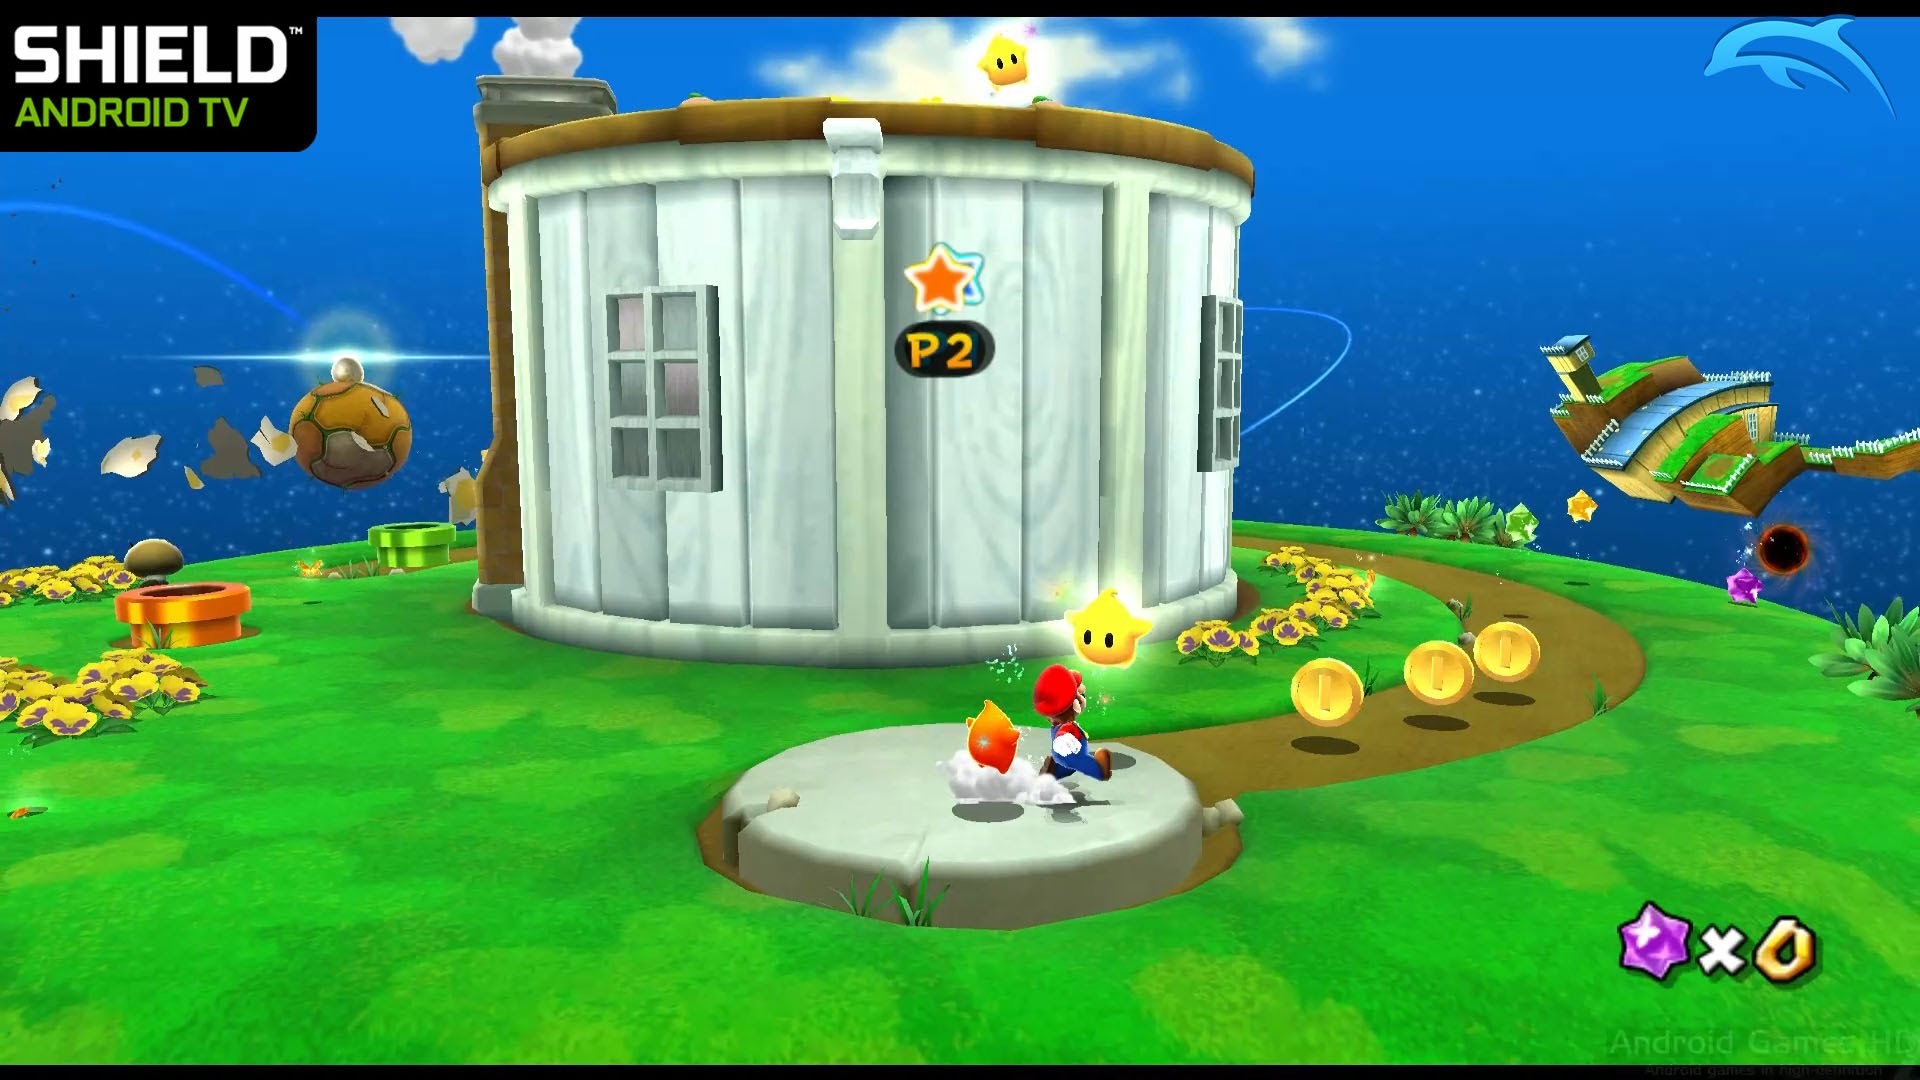 1920x1080 Dolphin Wii Emulator for Android - Super Mario Galaxy 2 1080p ingame  (Shield Android TV)